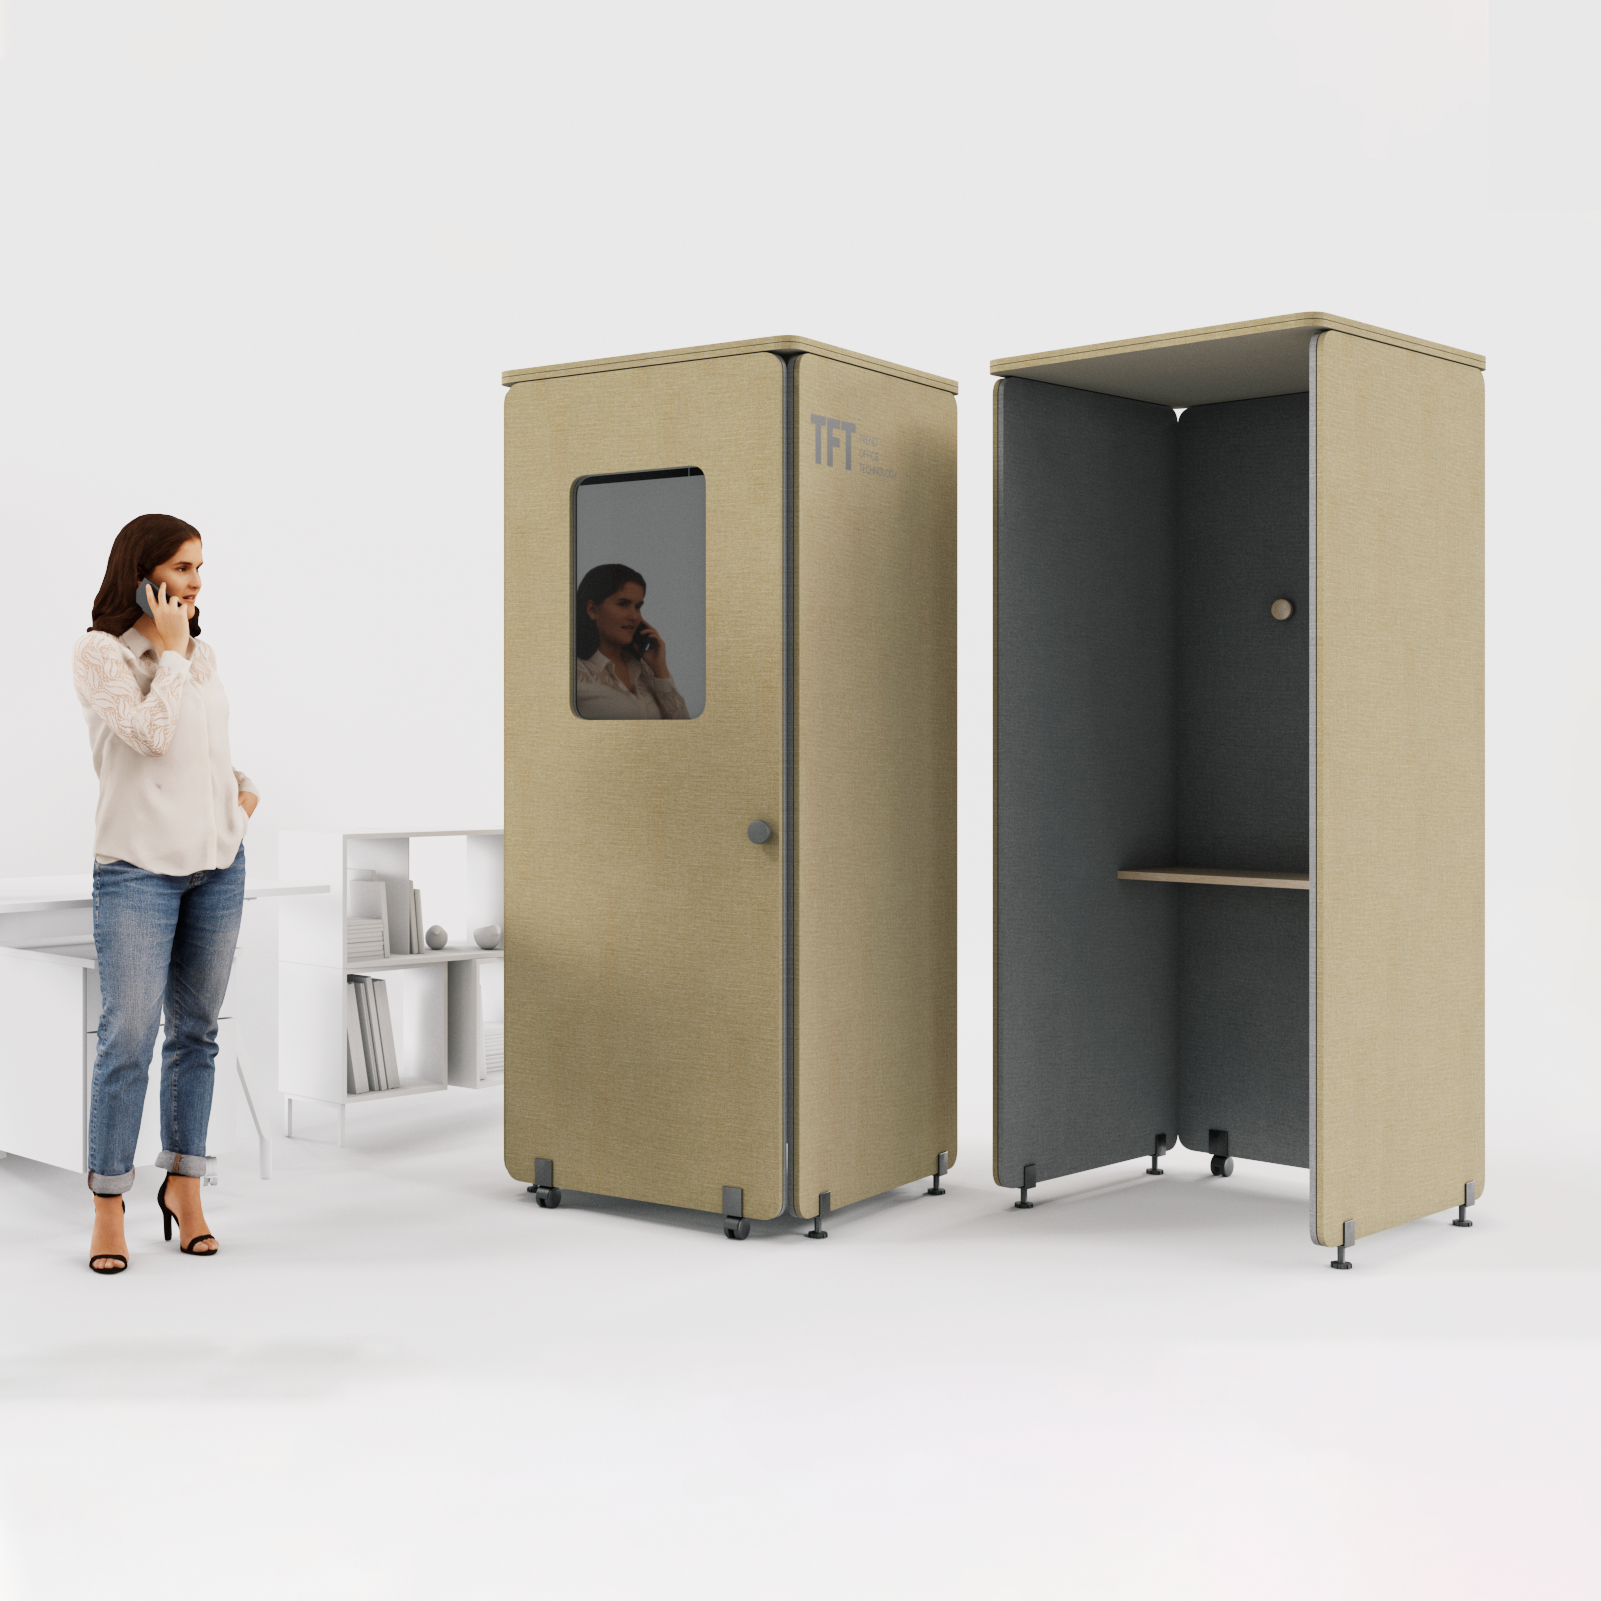 Hush Meeting Pods Acoustic Booths UK Portable Garden Office Pod Europe France, Germany, Spain, Ireland, Italy, Netherlands